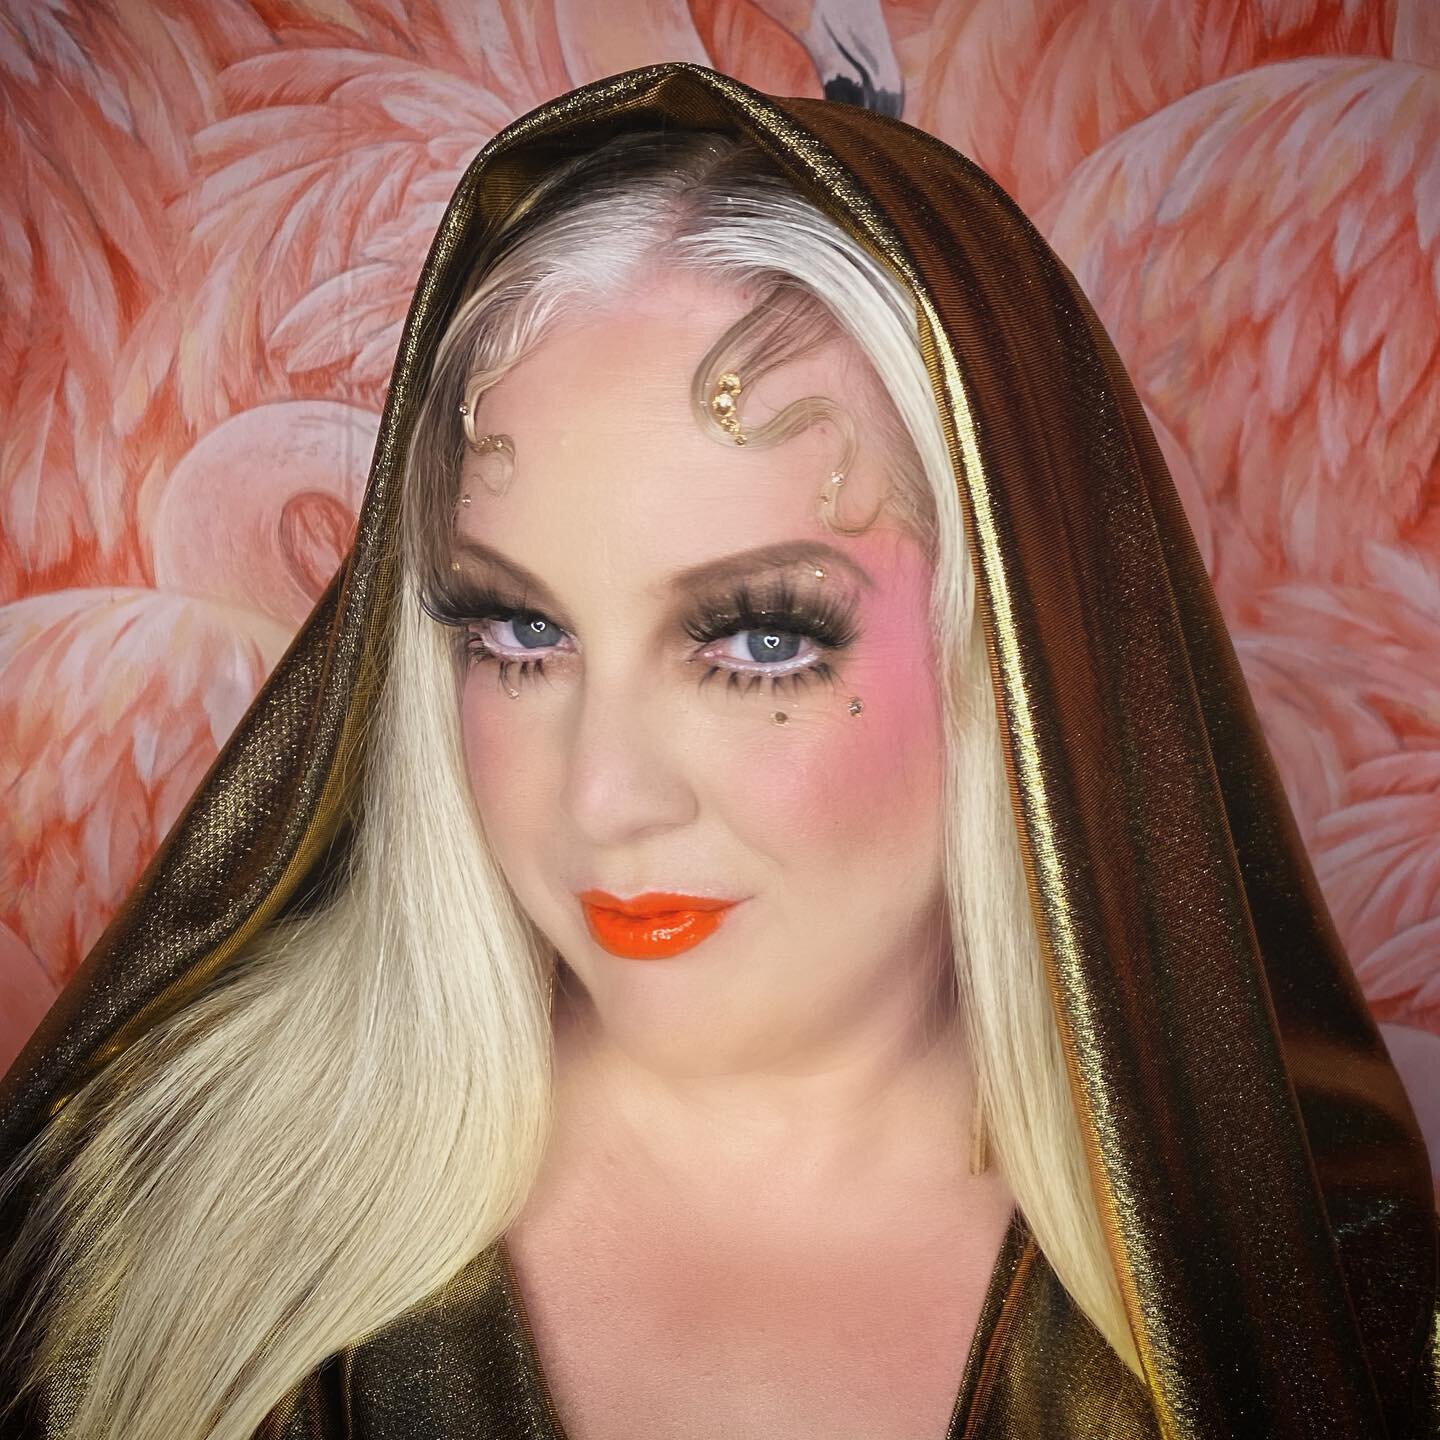 Makeup on this bombshell! 😍
Golden gawdess mug for @gypsytrampsandthieves for a fabulous studio 54 themed party last night. 
Thank you for capturing our love affair @joyleentaylor and for sharing your Clinker magic with me (thank you Gypsy for intro